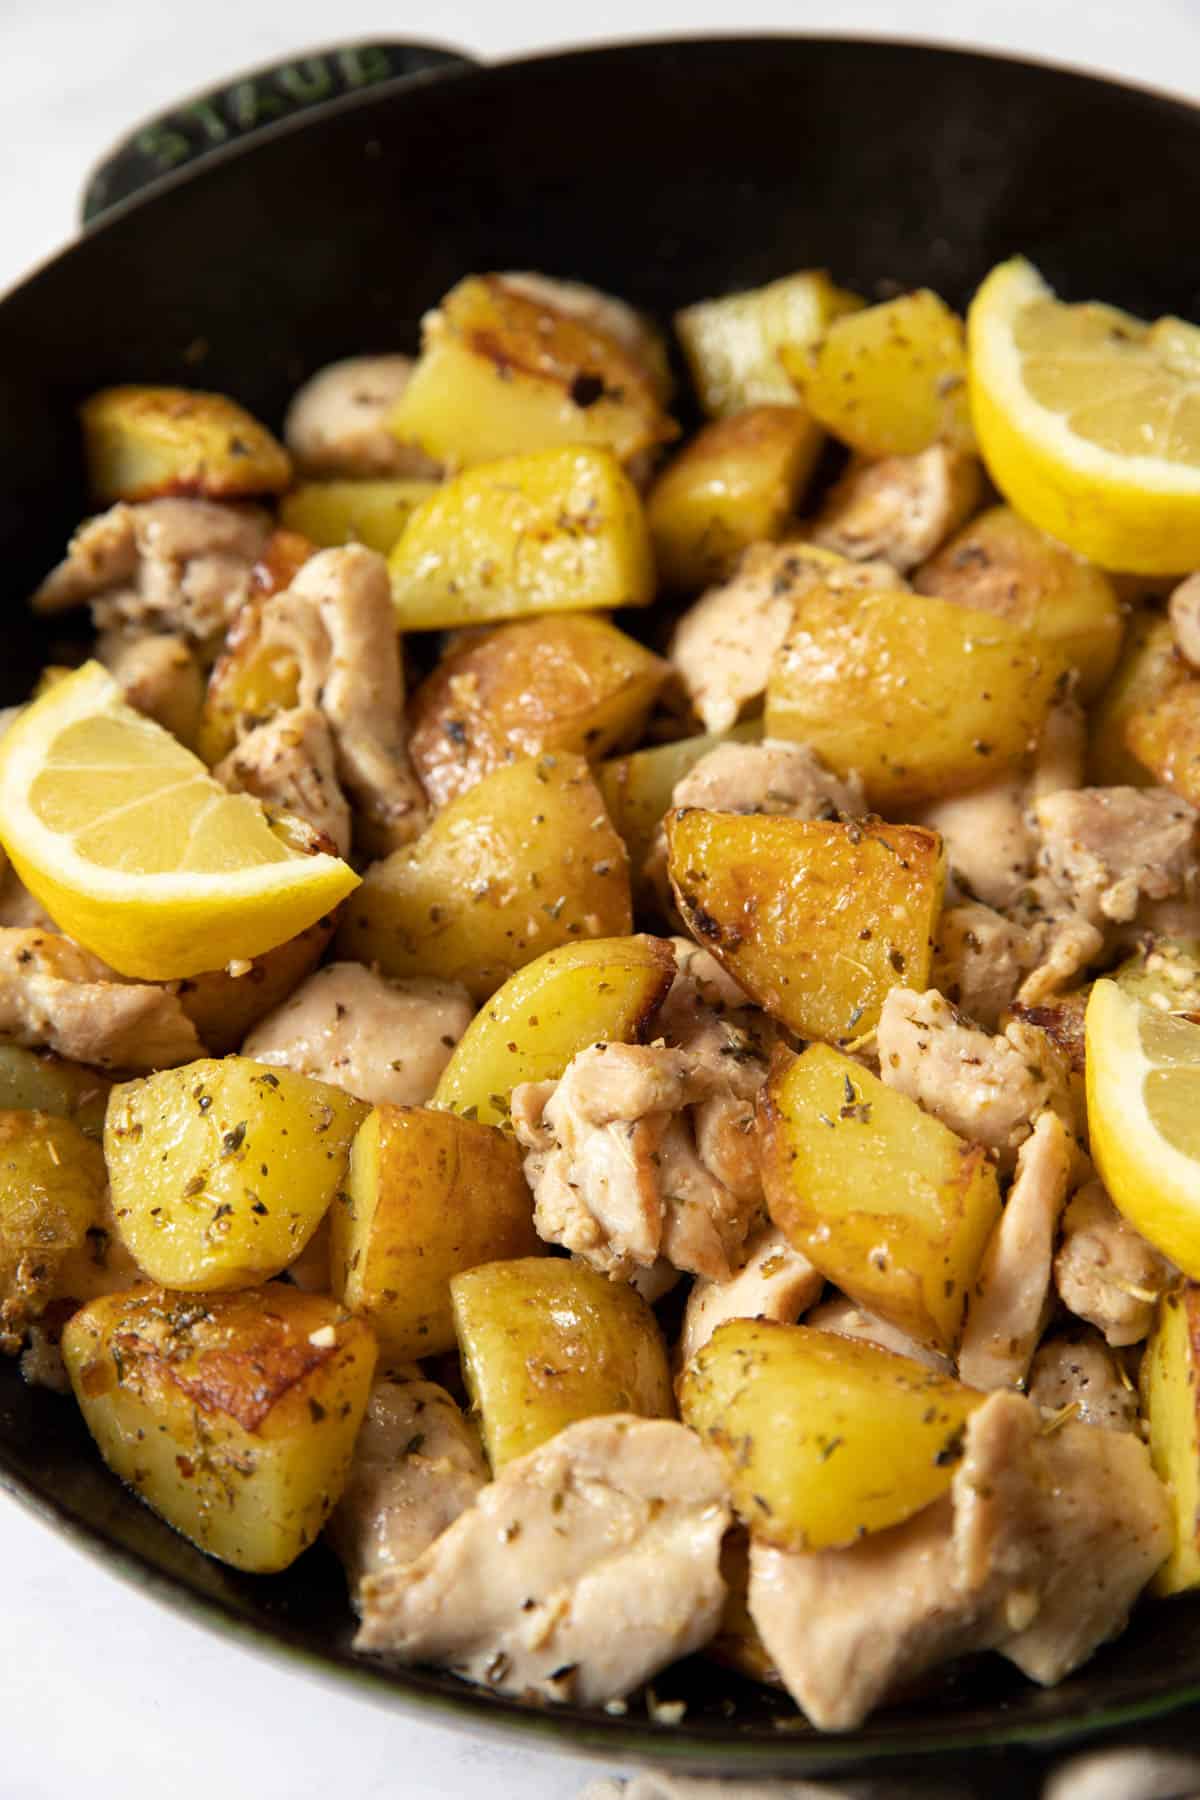 Chicken and potatoes in a skillet for serving.